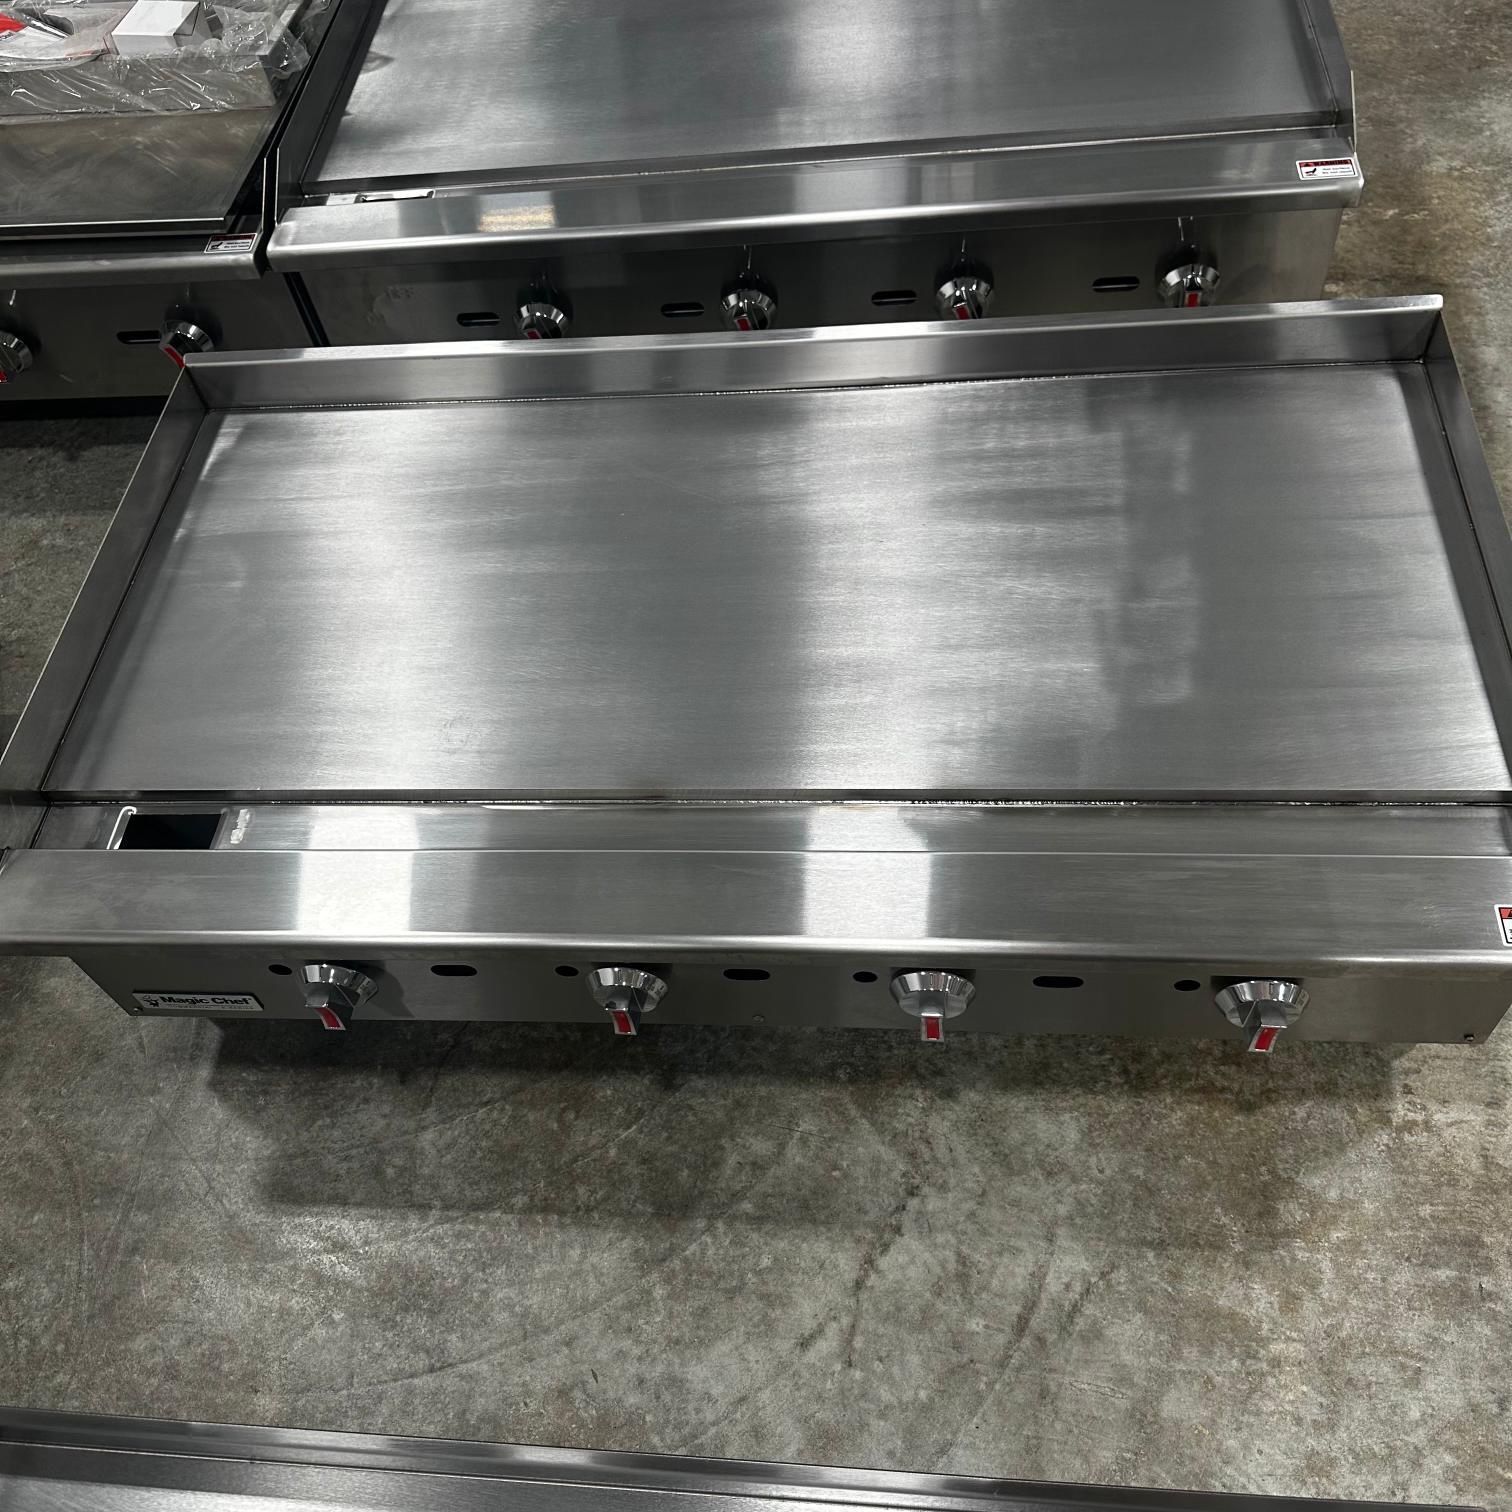 Commercial Countertop Gas Griddle.